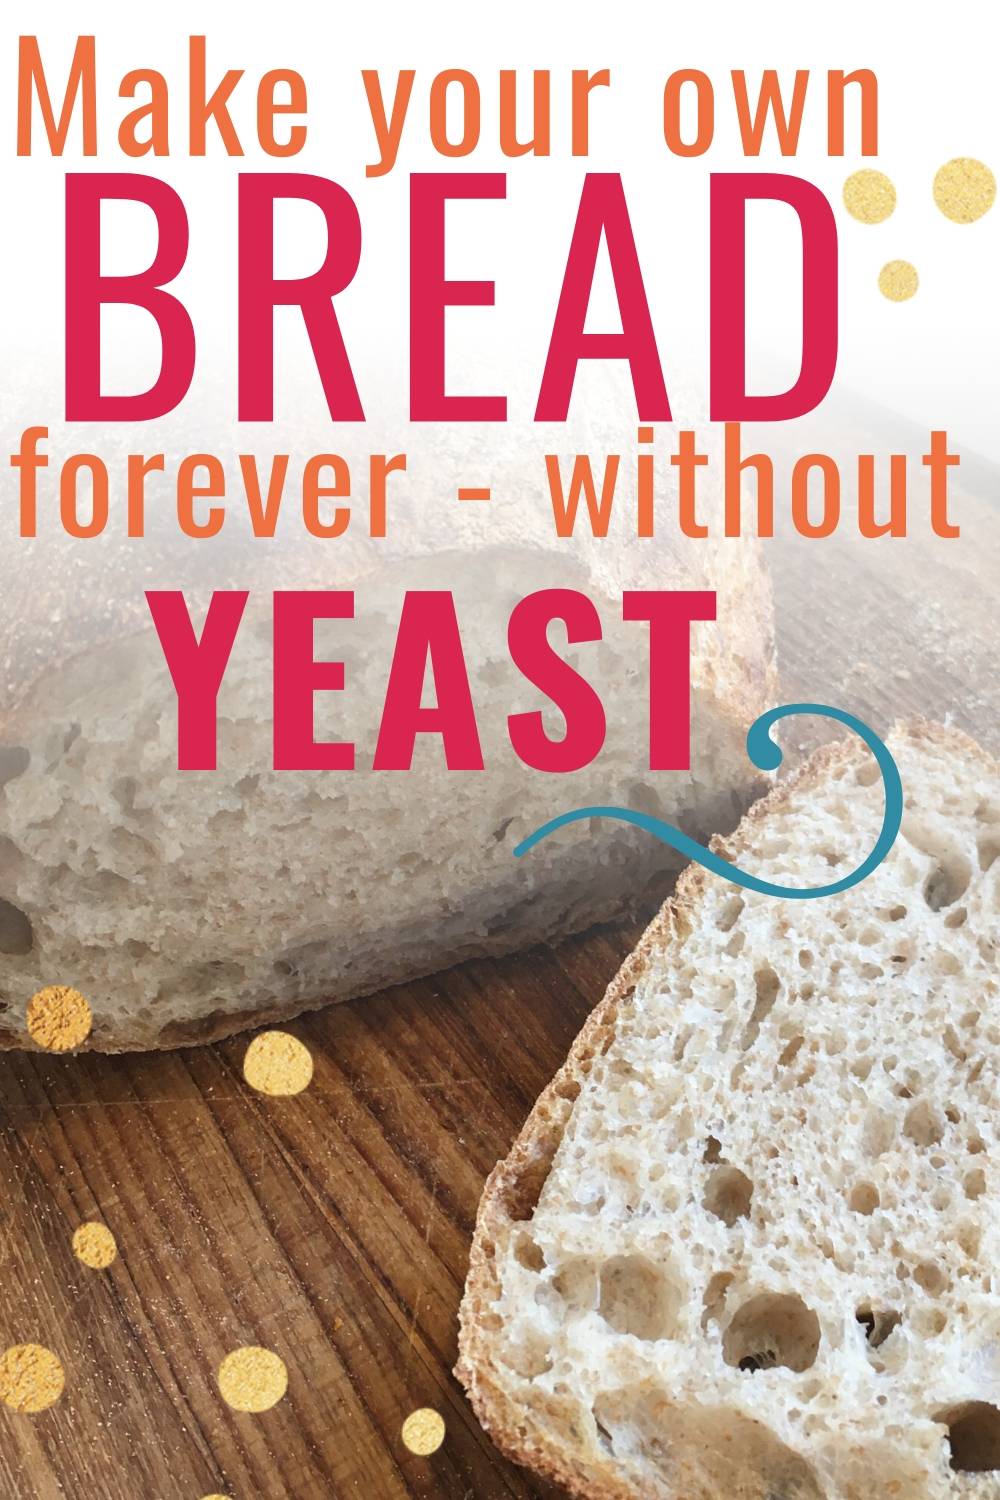 Soft bread with a caption make your own bread forever - without yeast.